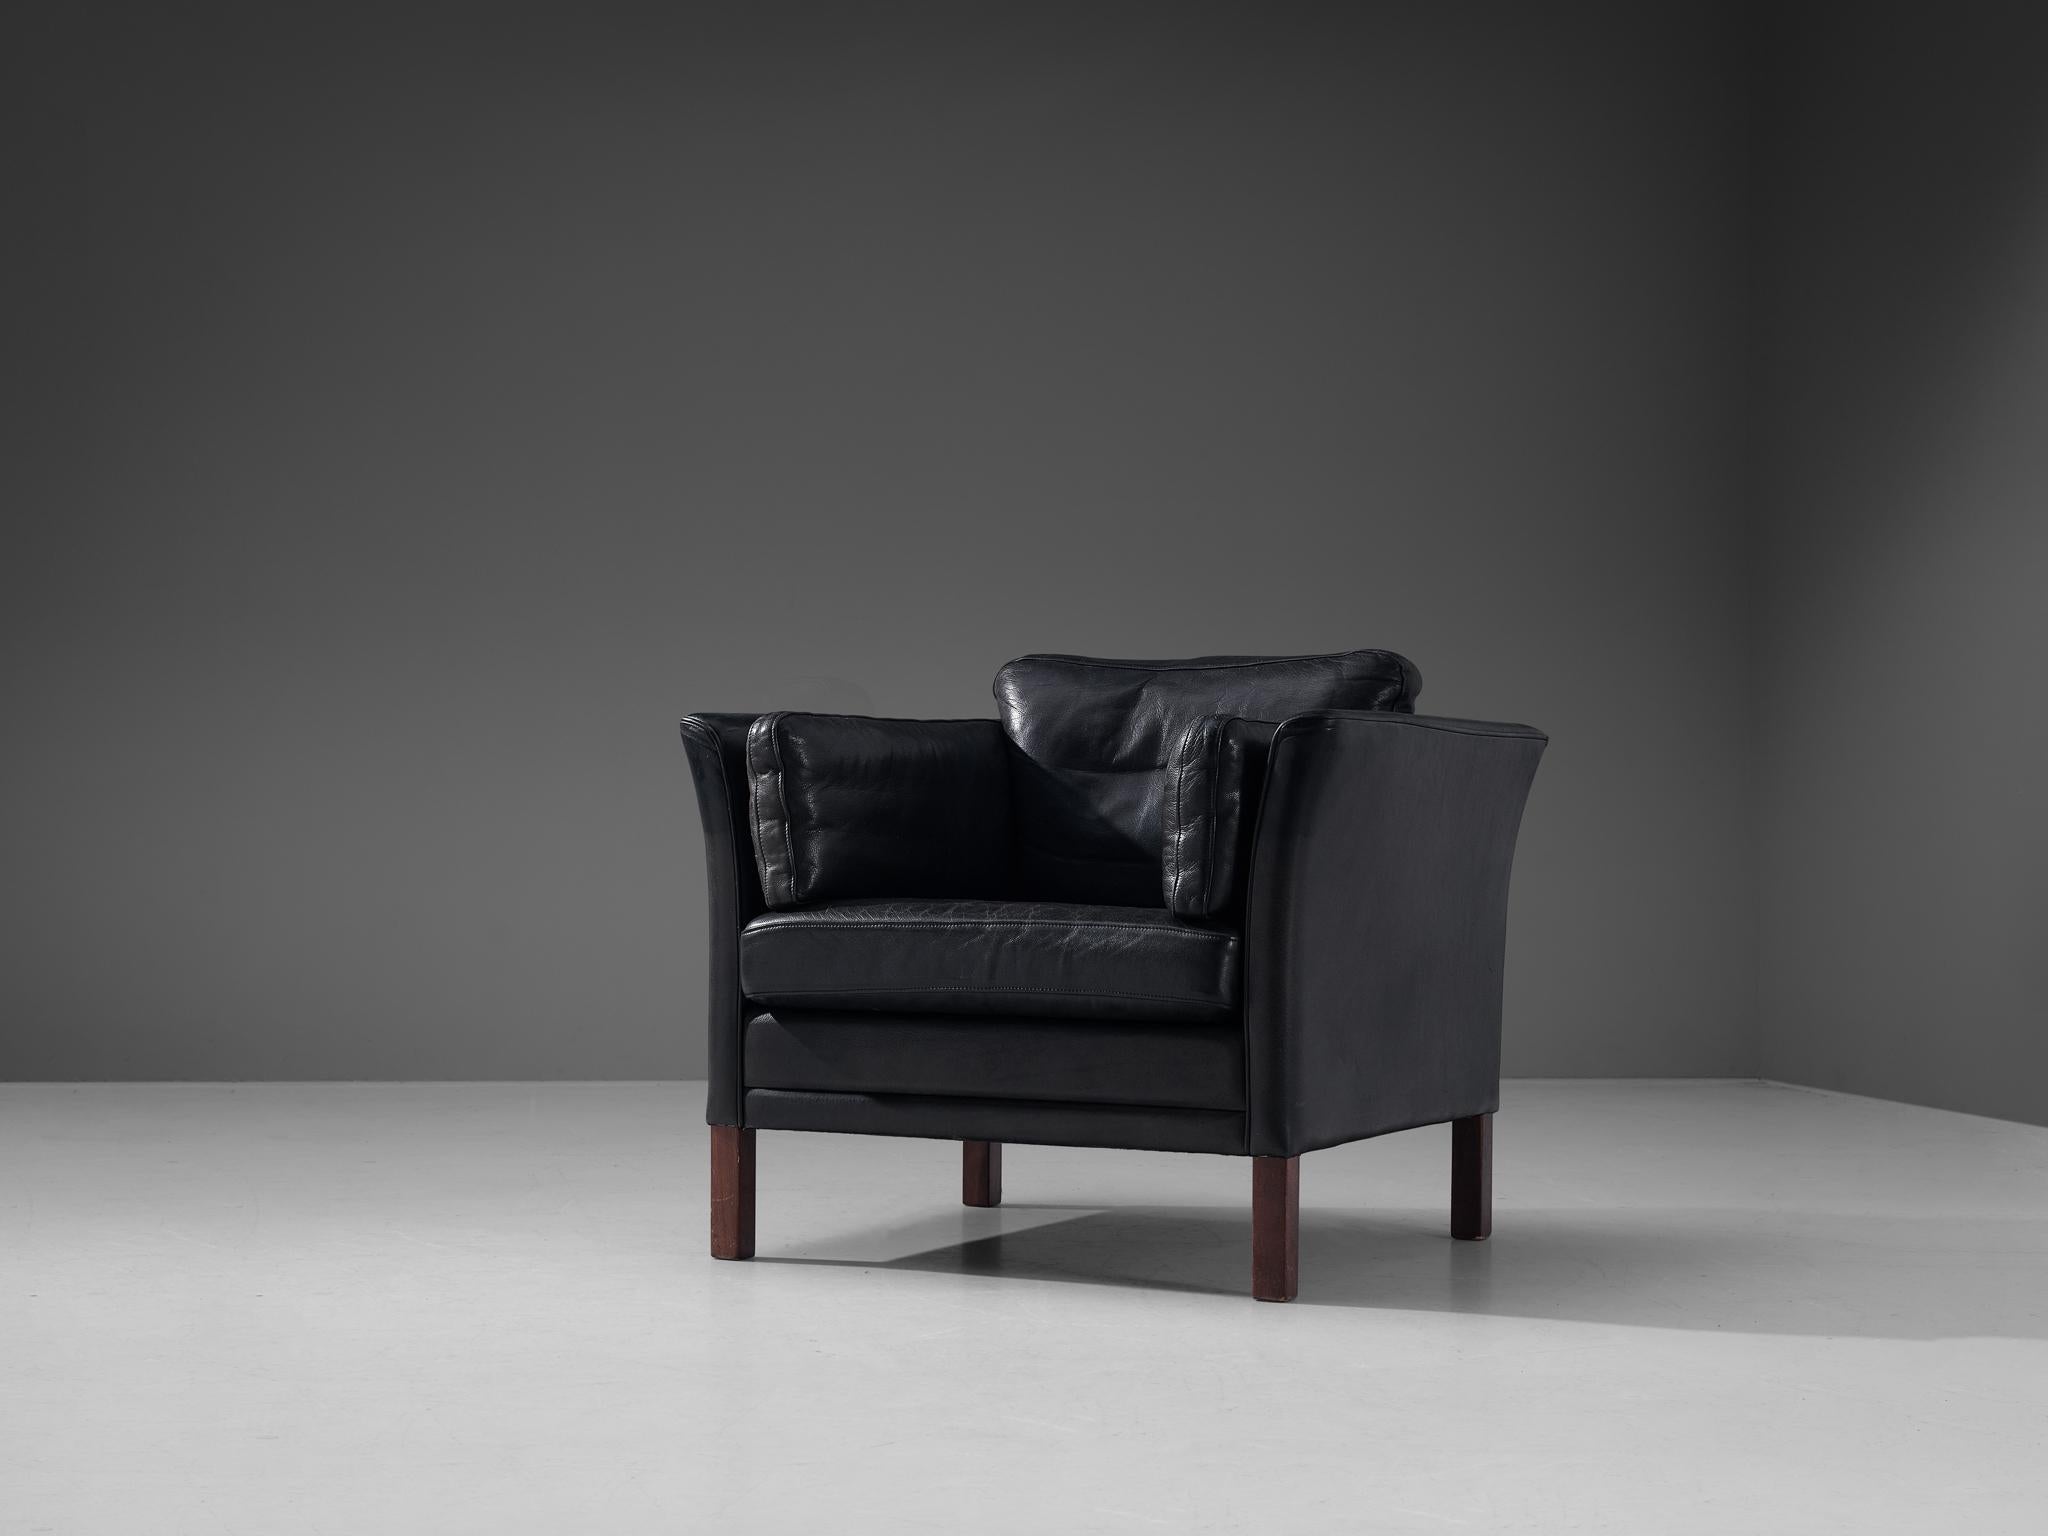 Armchair, leather, stained wood, Denmark, 1960s. 

This elegant armchair hails from Denmark, crafted in the 1960s. Upholstered in supple black leather and accented with stained wood, its design boasts distinctive outward-curving armrests, lending